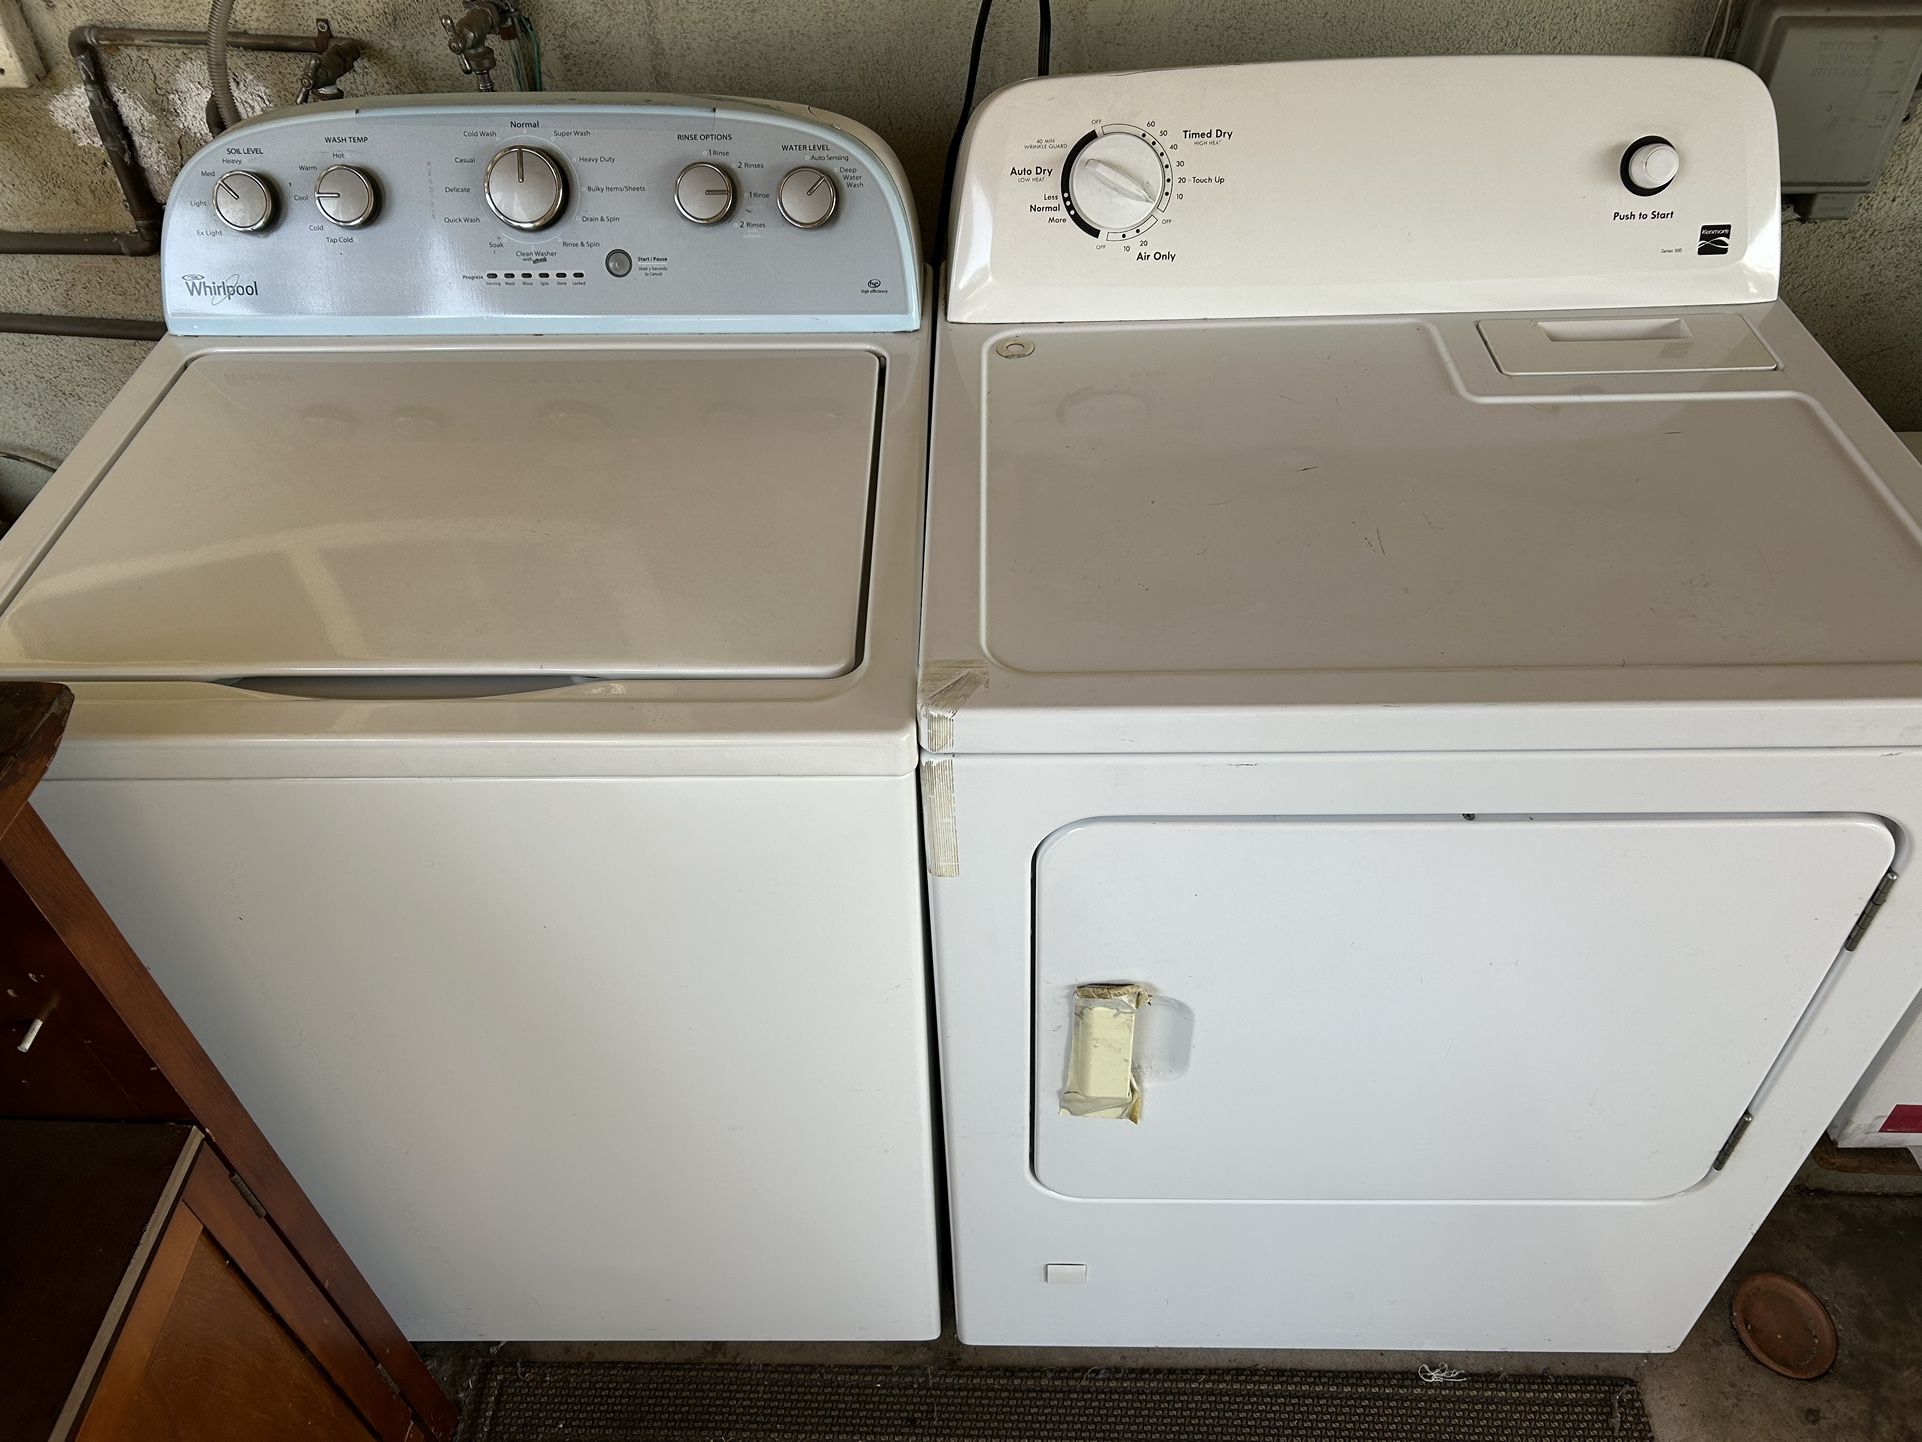 Whirlpool Washer and Kenmore Dryer